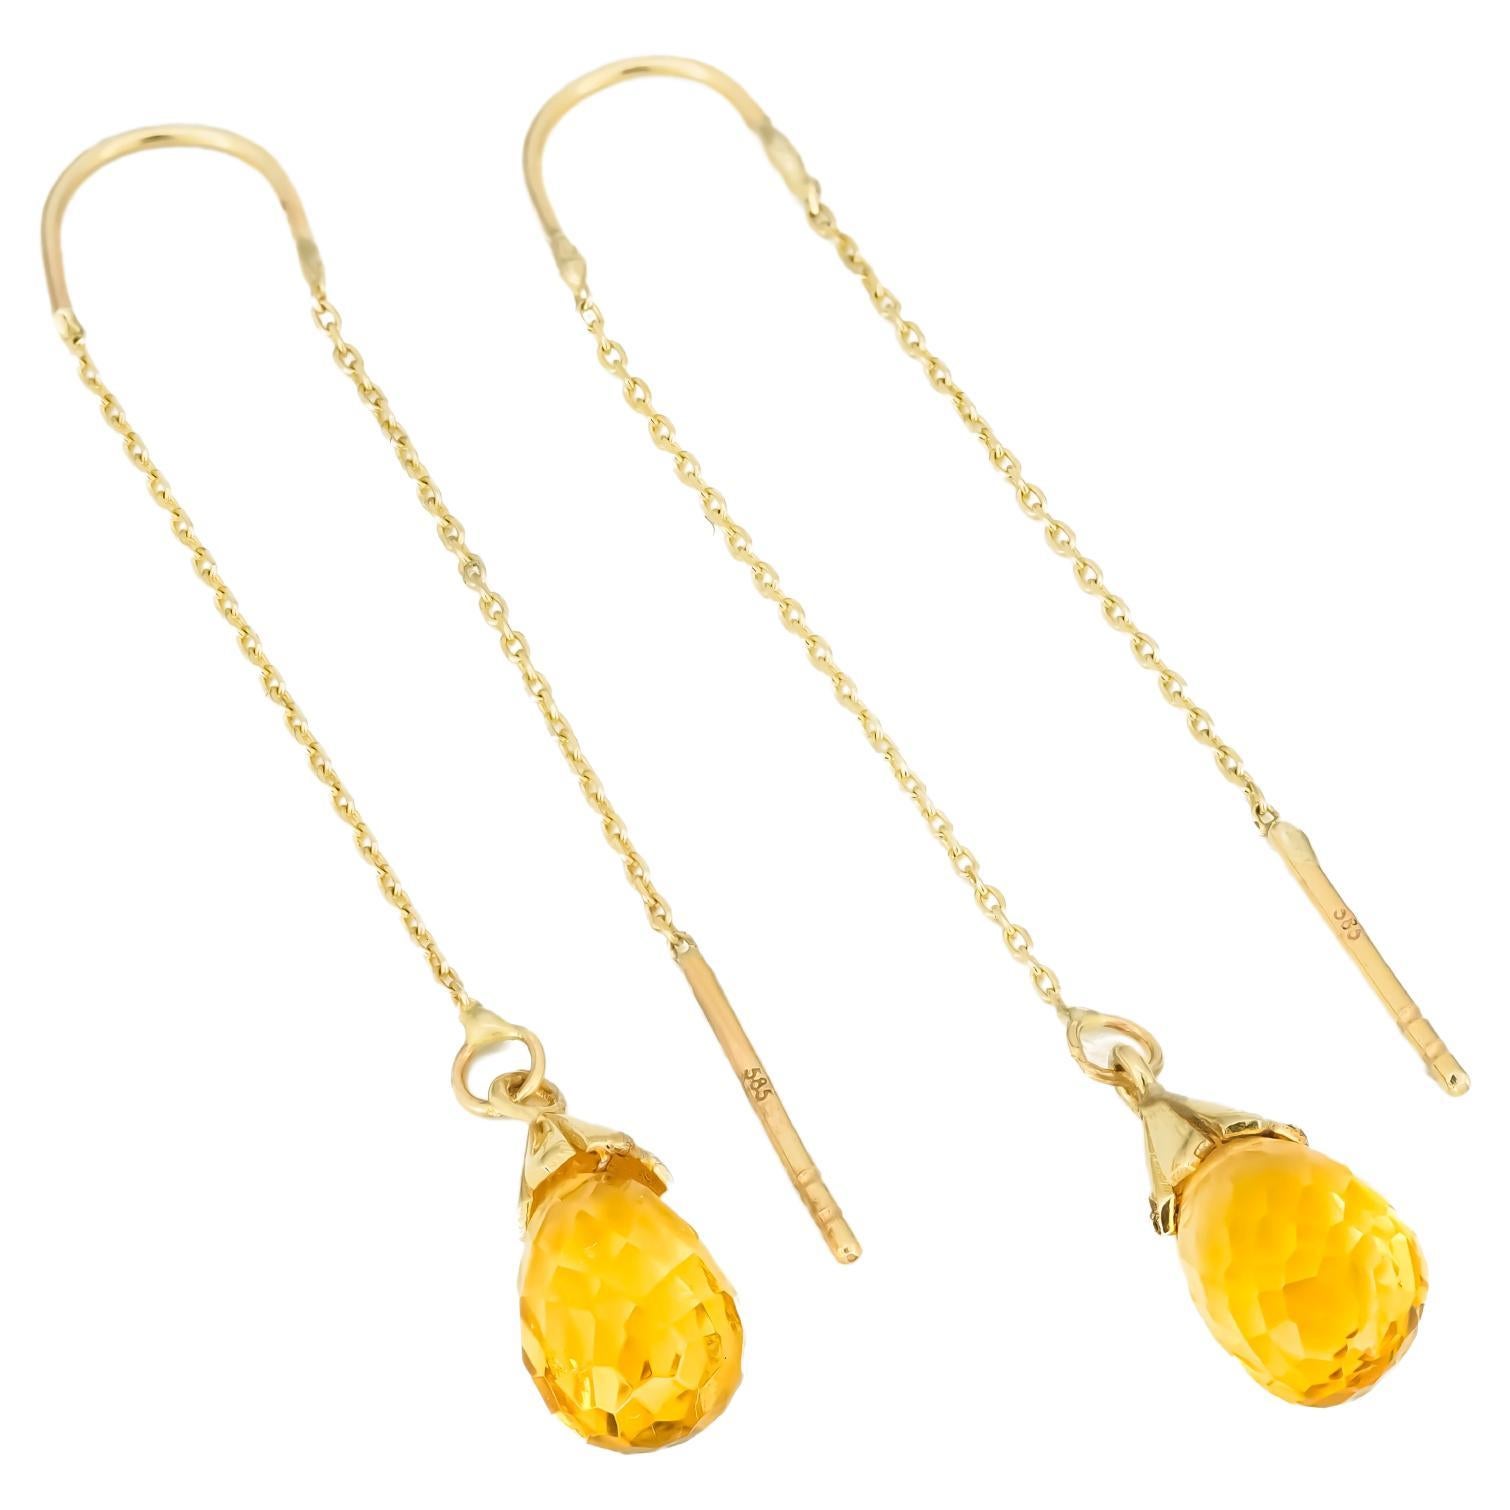 14 k yellow gold Threader earrings with citrines. Thin Cable Chain citrine earrings.  U Shape Ear Threaders. 
Everyday citrine earrings. Briolette citrine earrings. Citrine Drop earrings. Citrine gold earrings. 
Metal: 14k yellow gold
Weight: 1.81